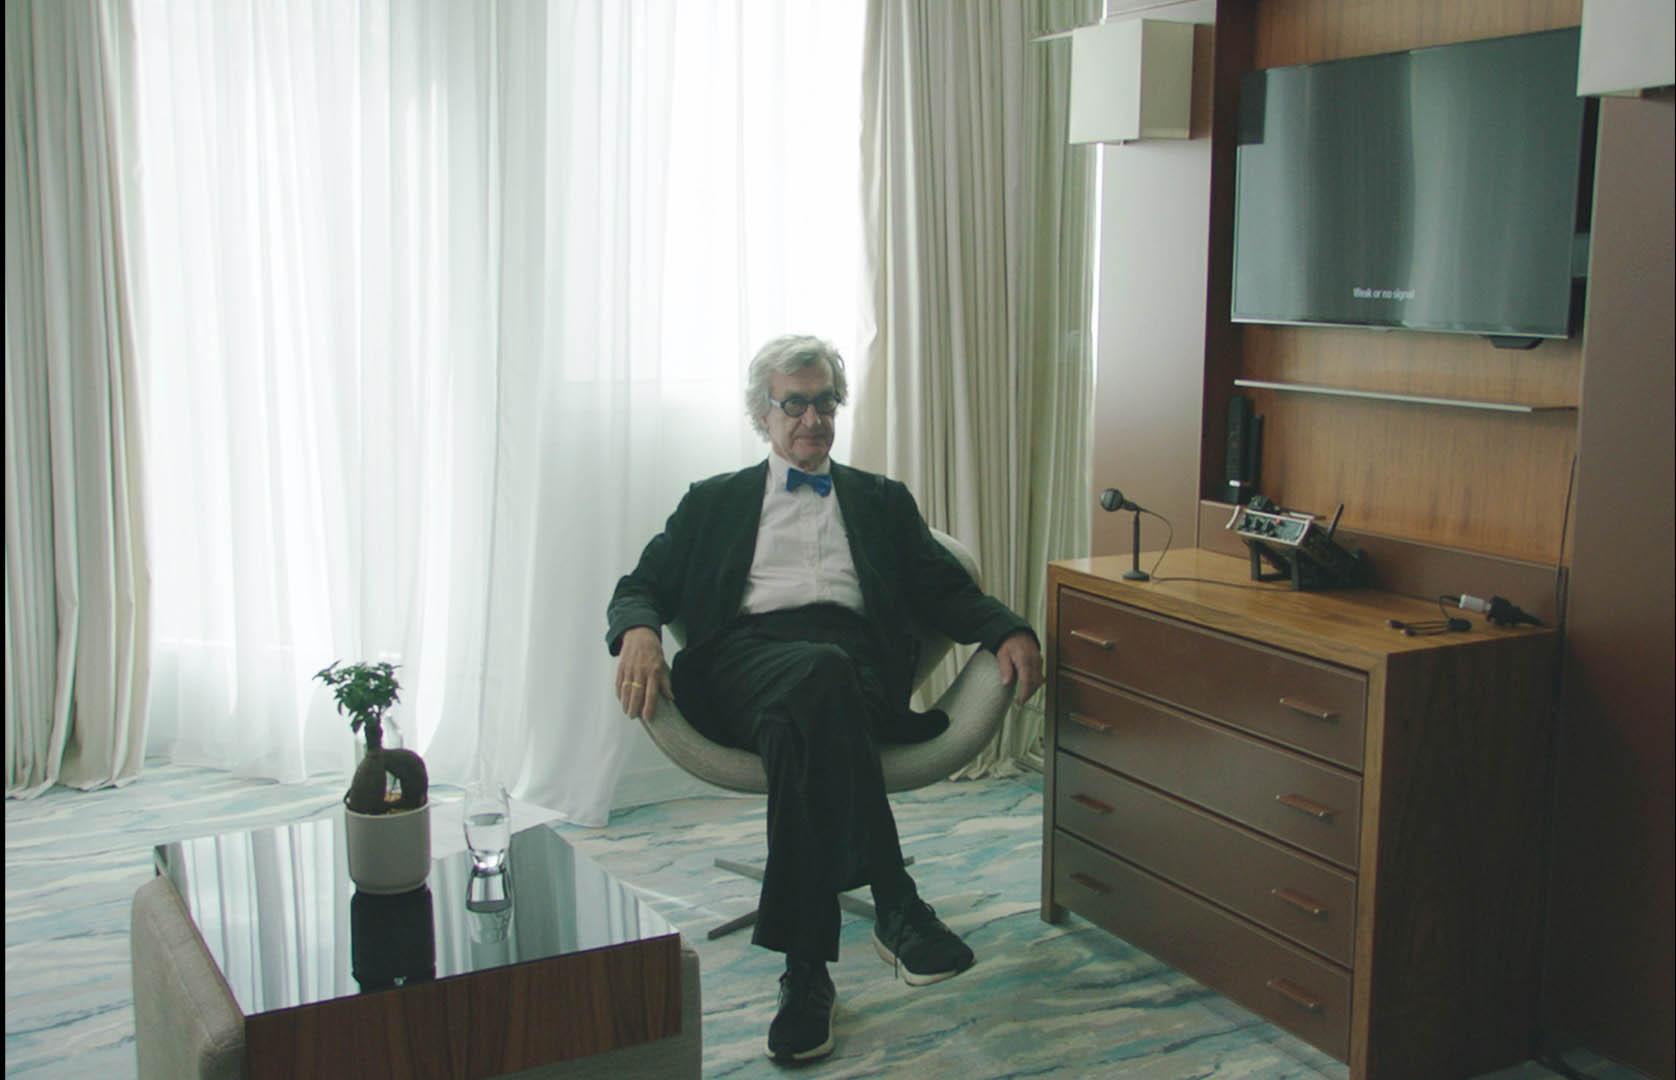 Wim Wenders in Room 999 [tag: Wim Wenders] [credit: MK Productions; courtesy of CG Entertainment]